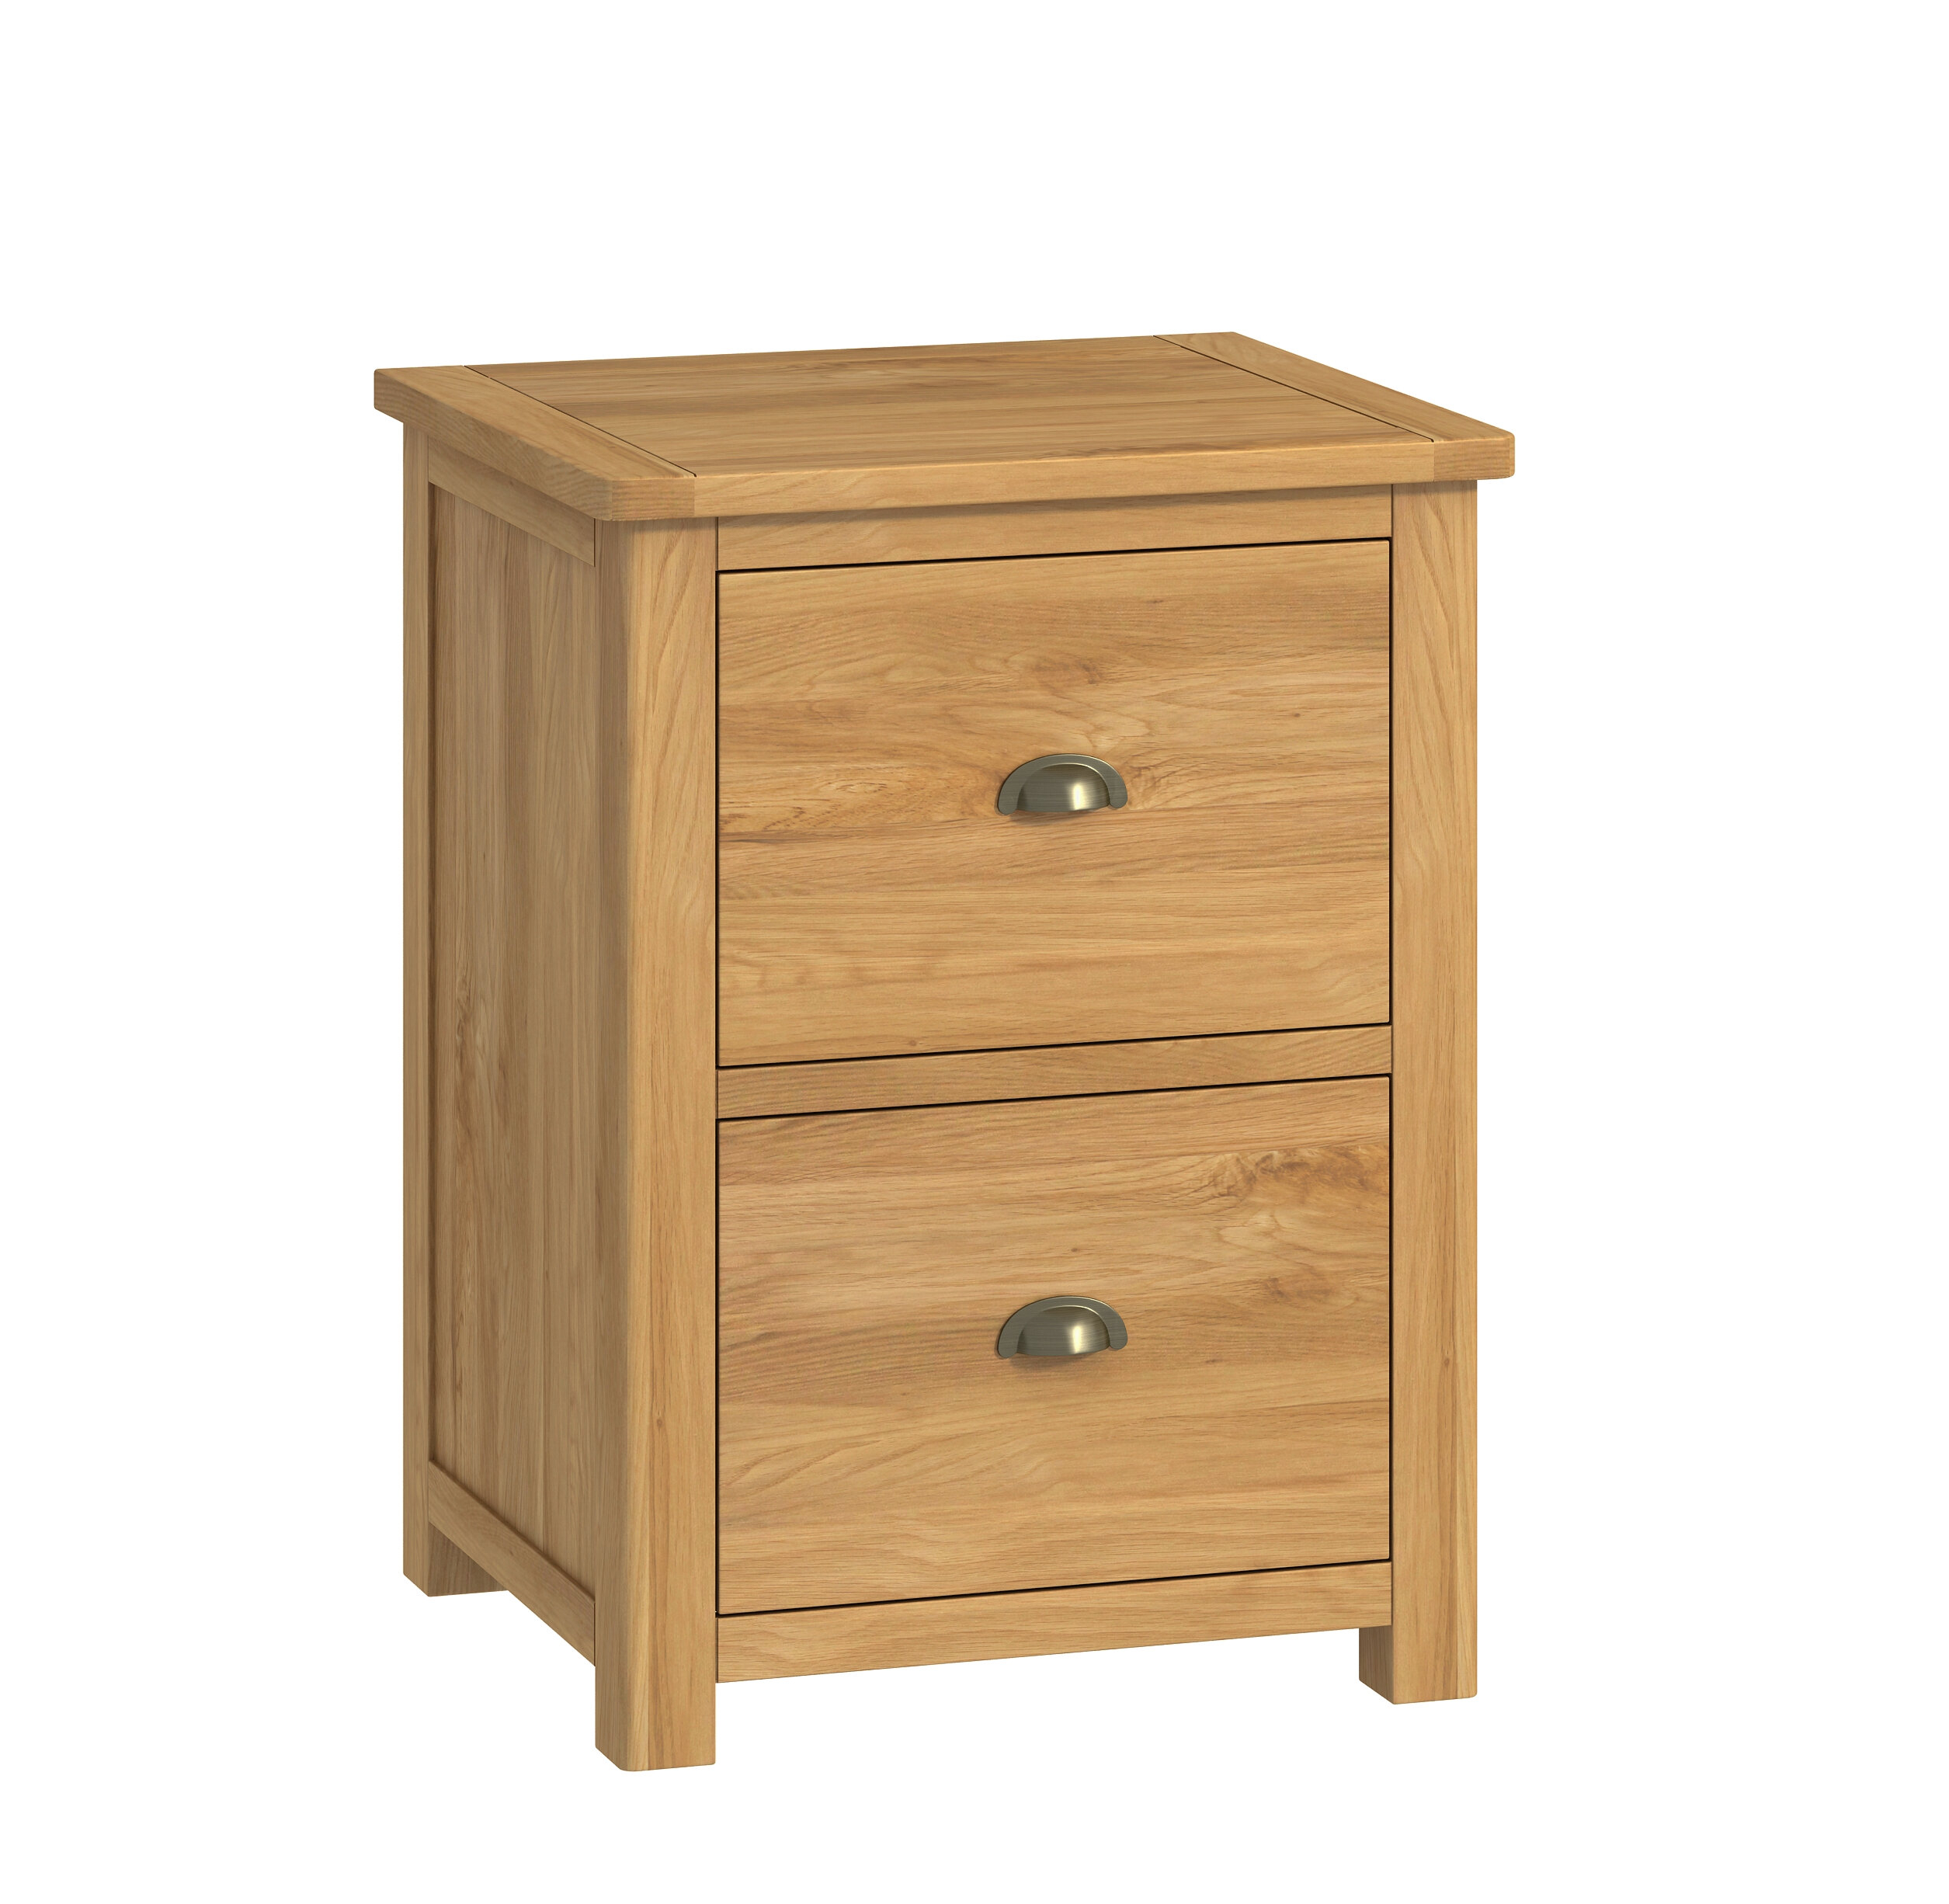 Beachcrest Home Harris 2 Drawer Filing Cabinet Wayfaircouk with regard to size 2510 X 2452